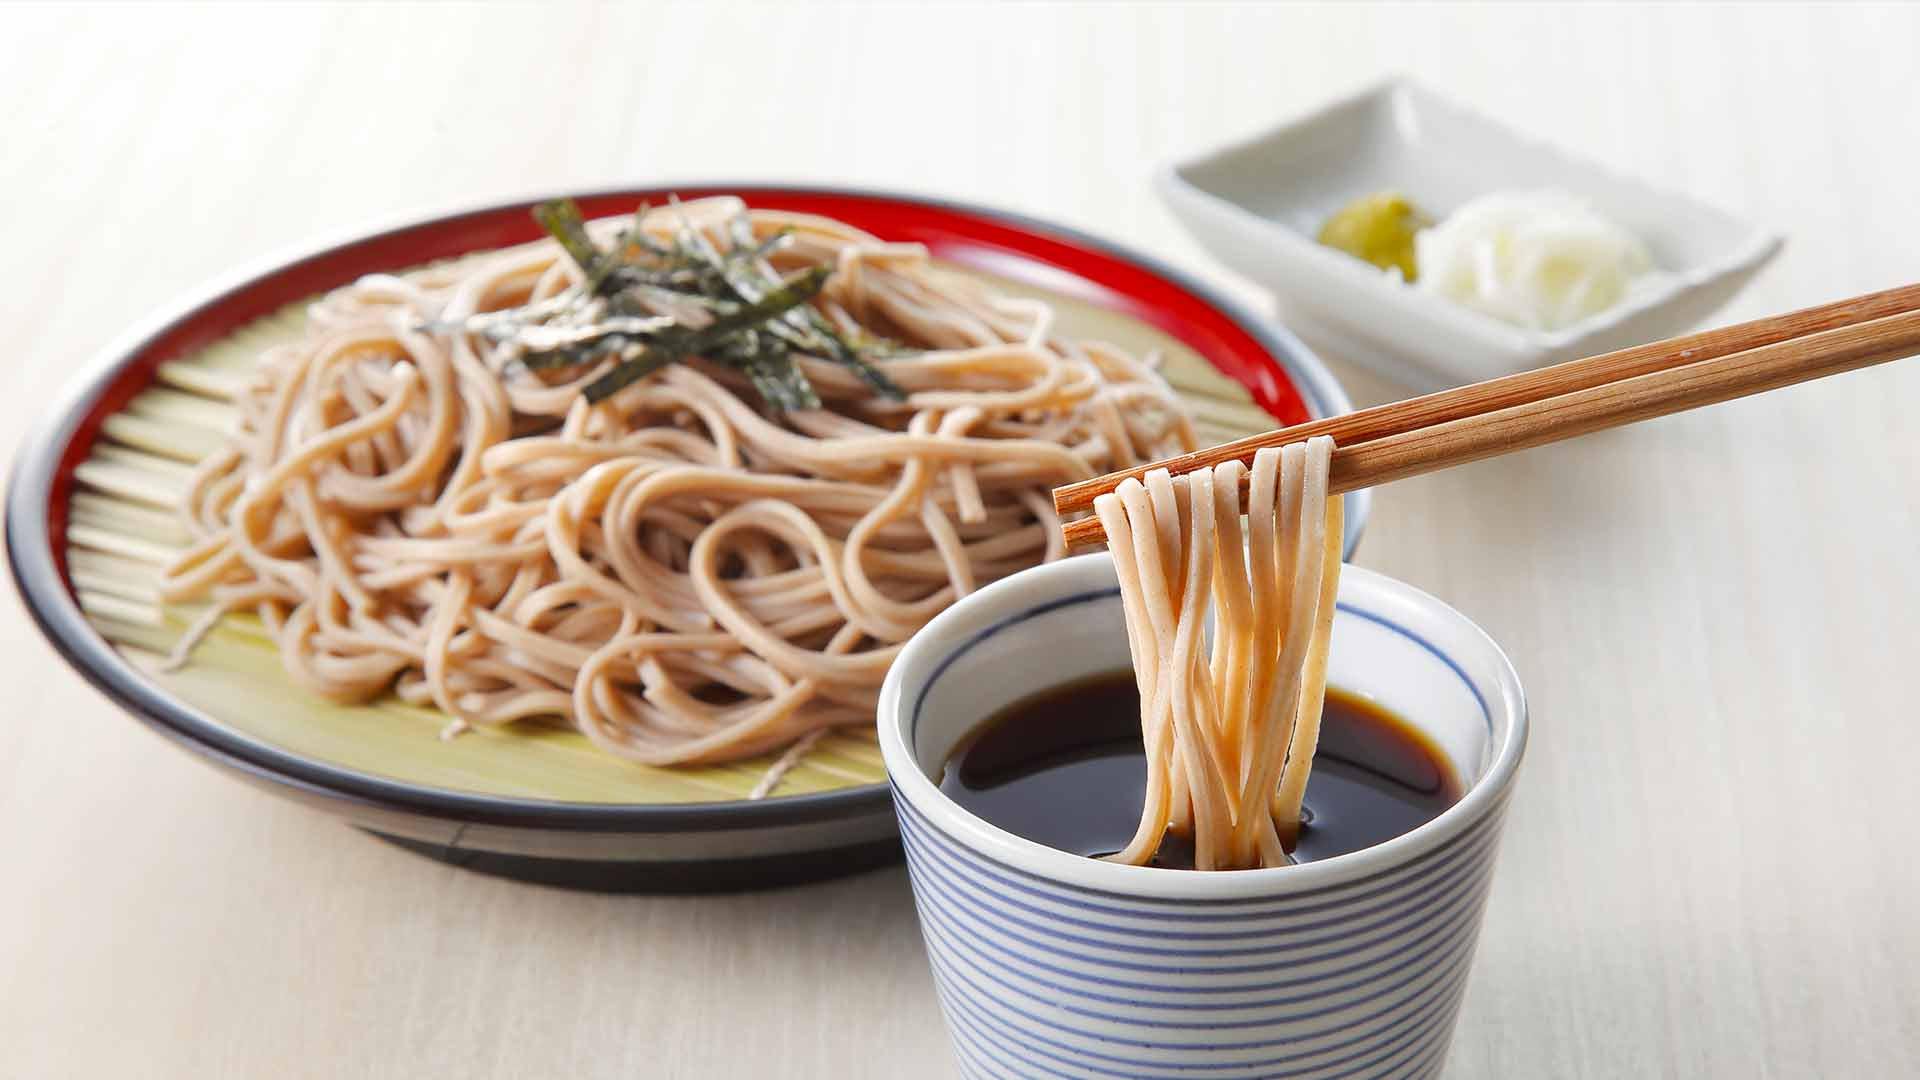 Soba: A Bowl of Noodles with Health Benefits